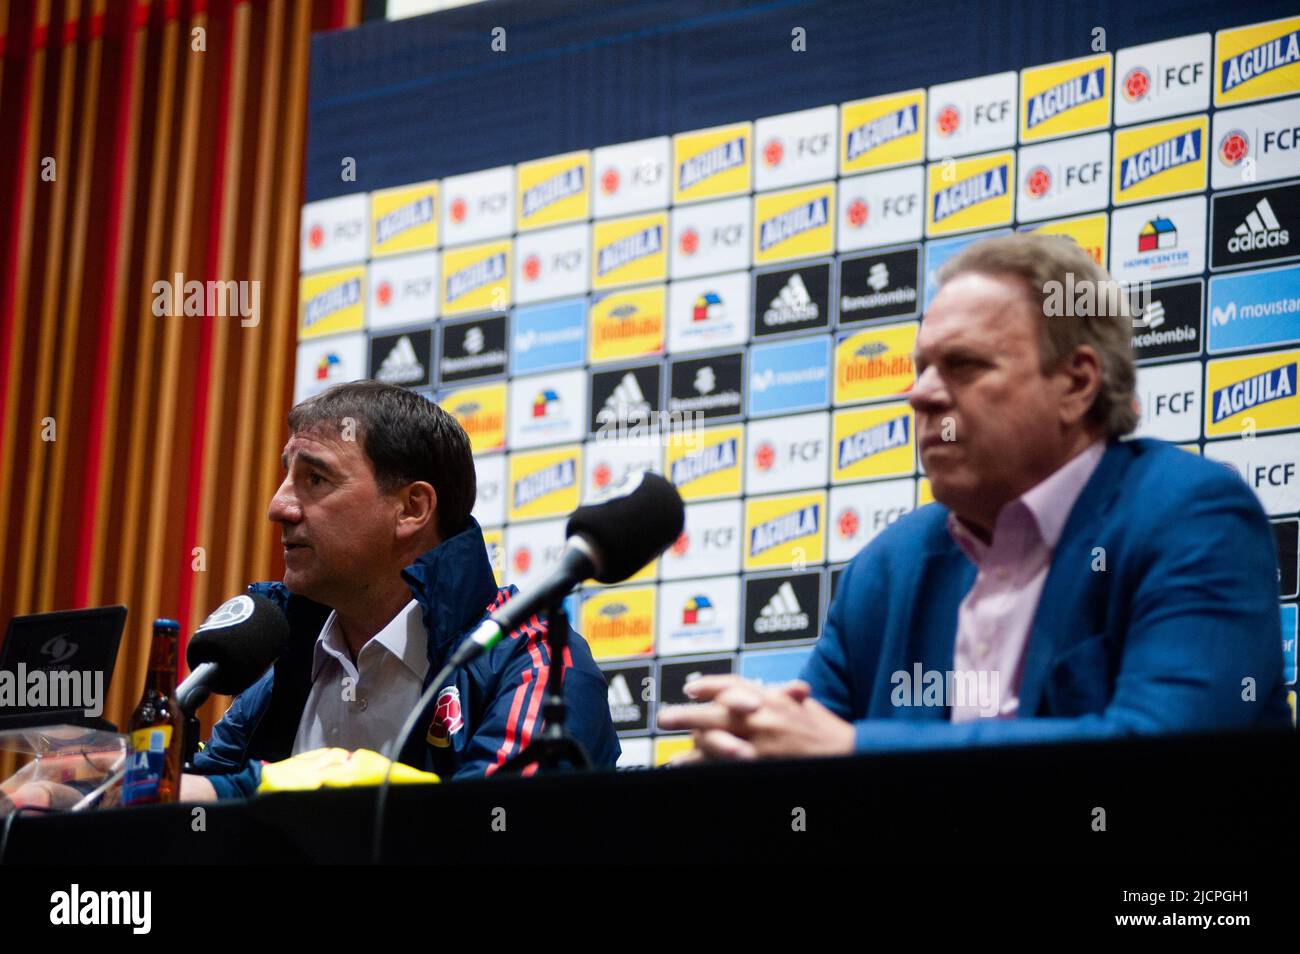 Colombia's federation of football soccer team unveils its new coach in replacement of Reinaldo Rueda in a press conference with new coach Nestor Loren Stock Photo